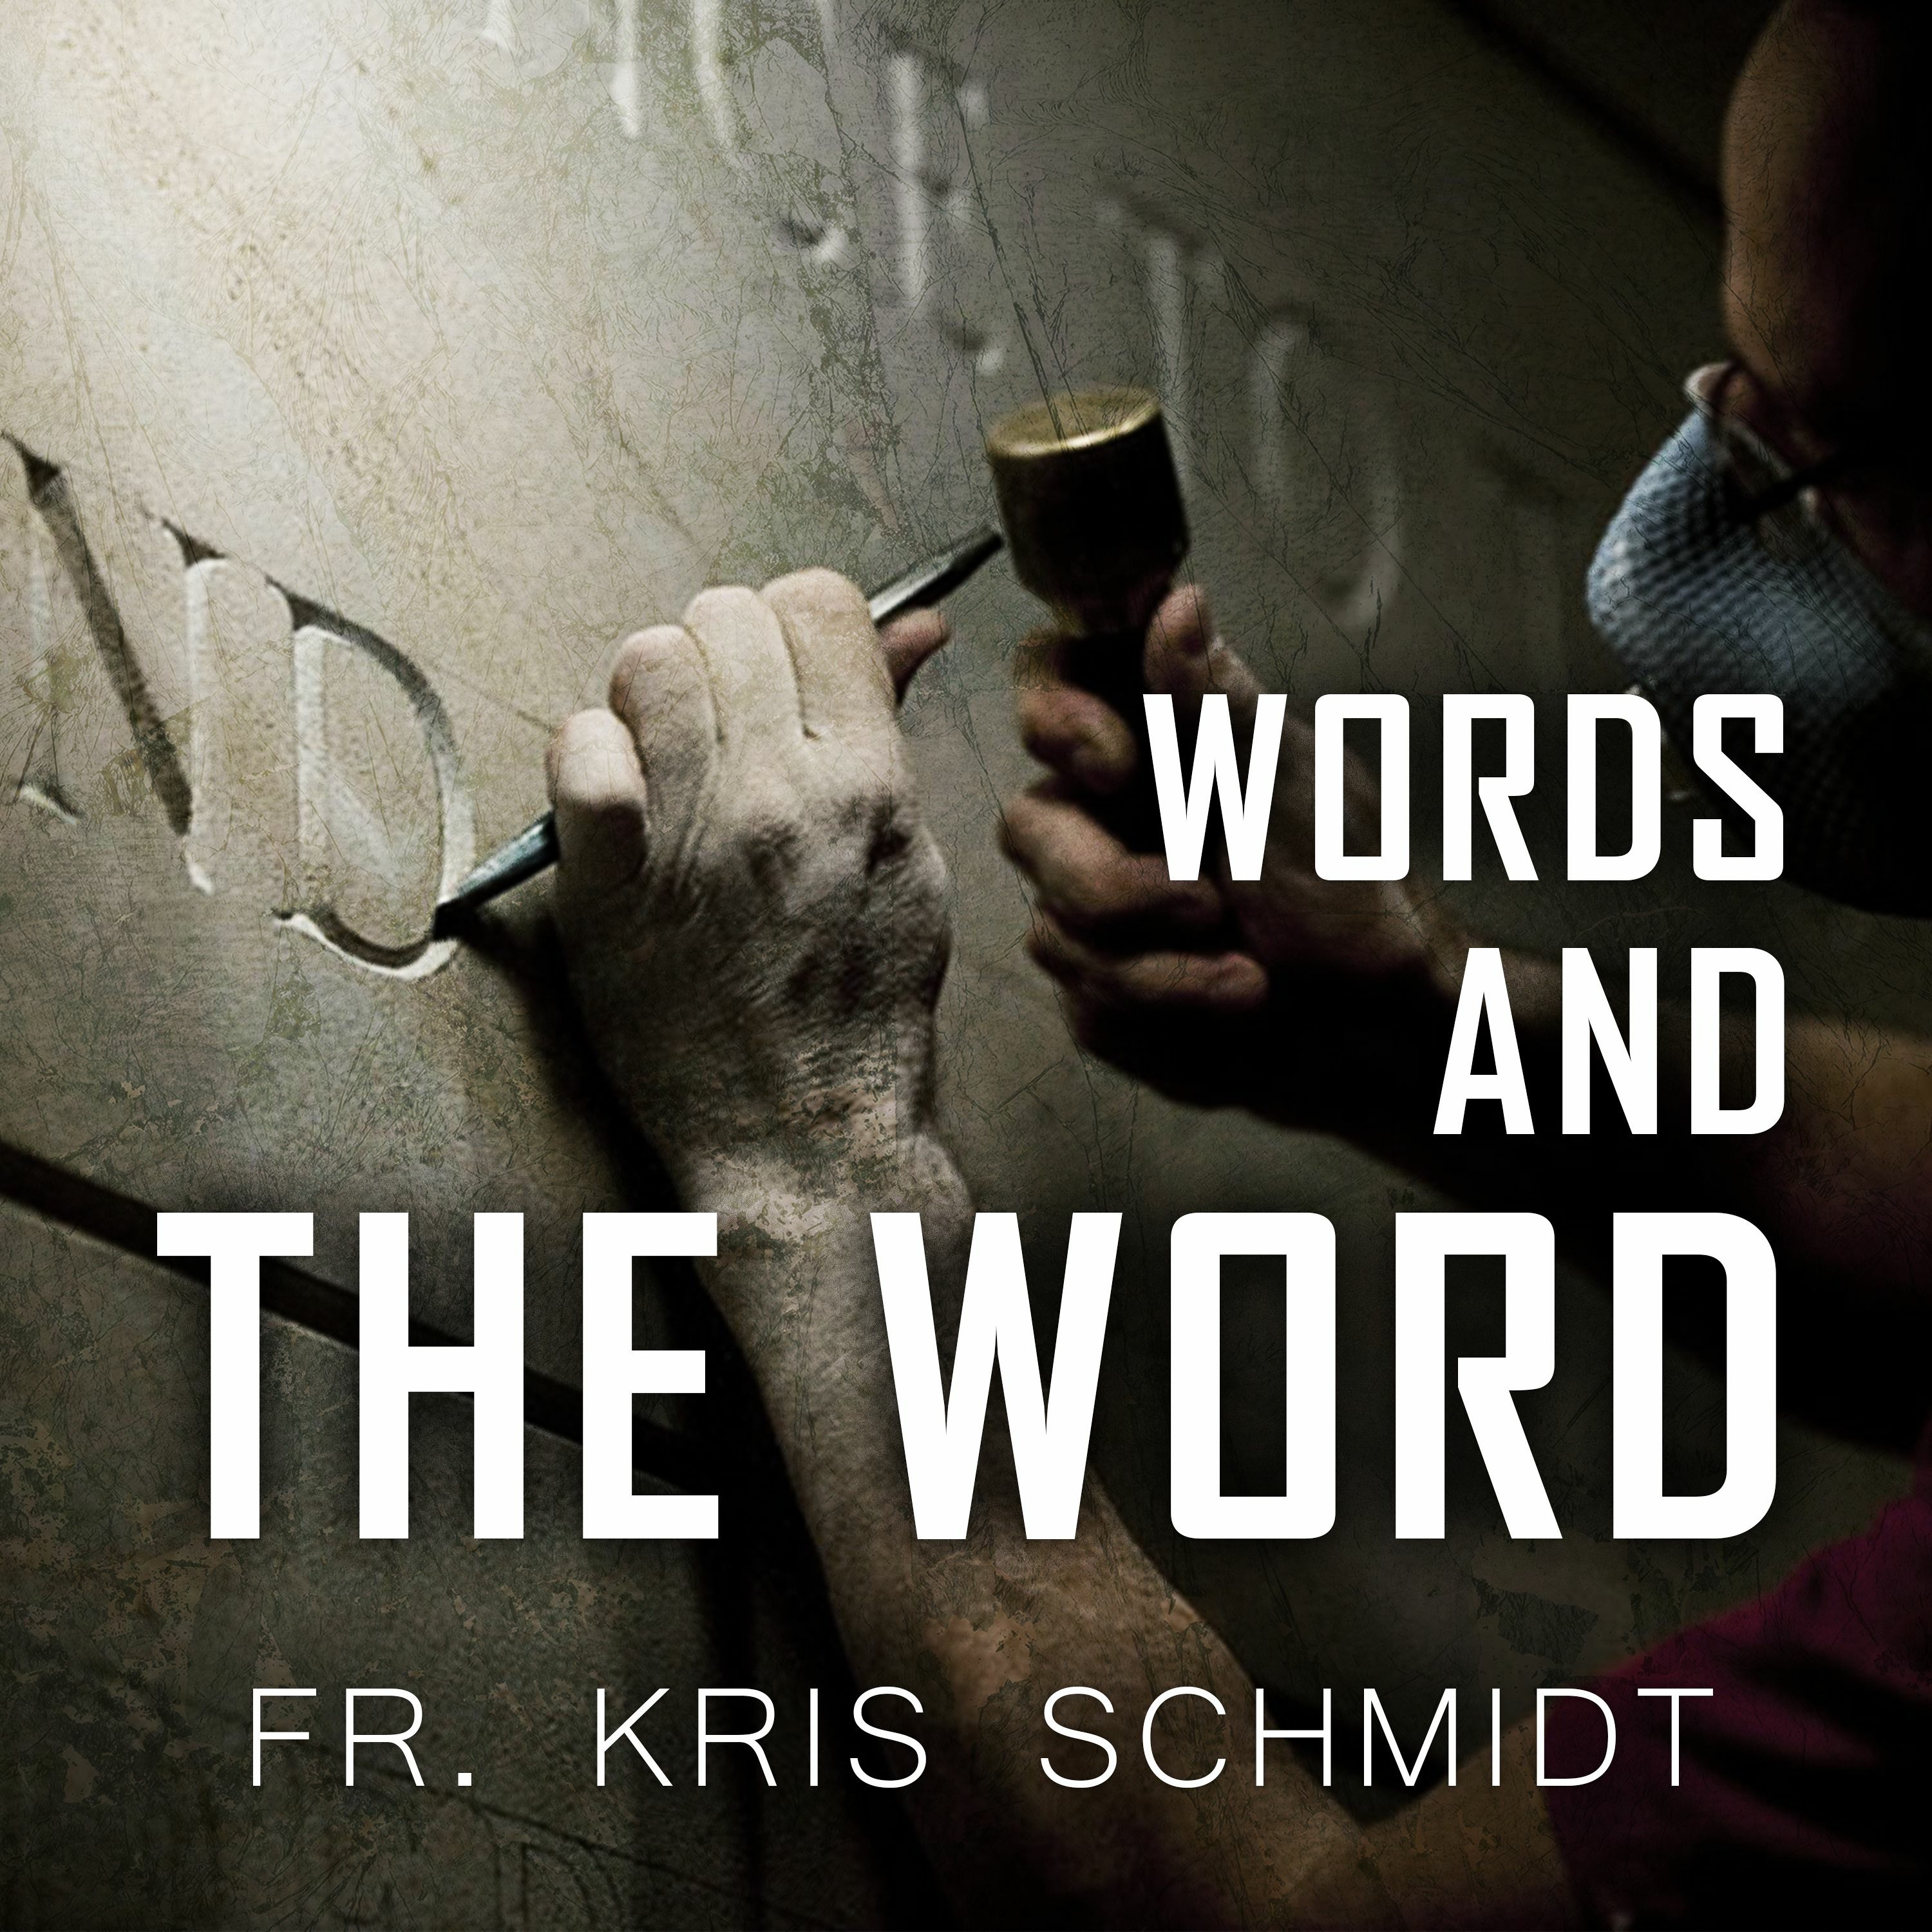 Words and The Word